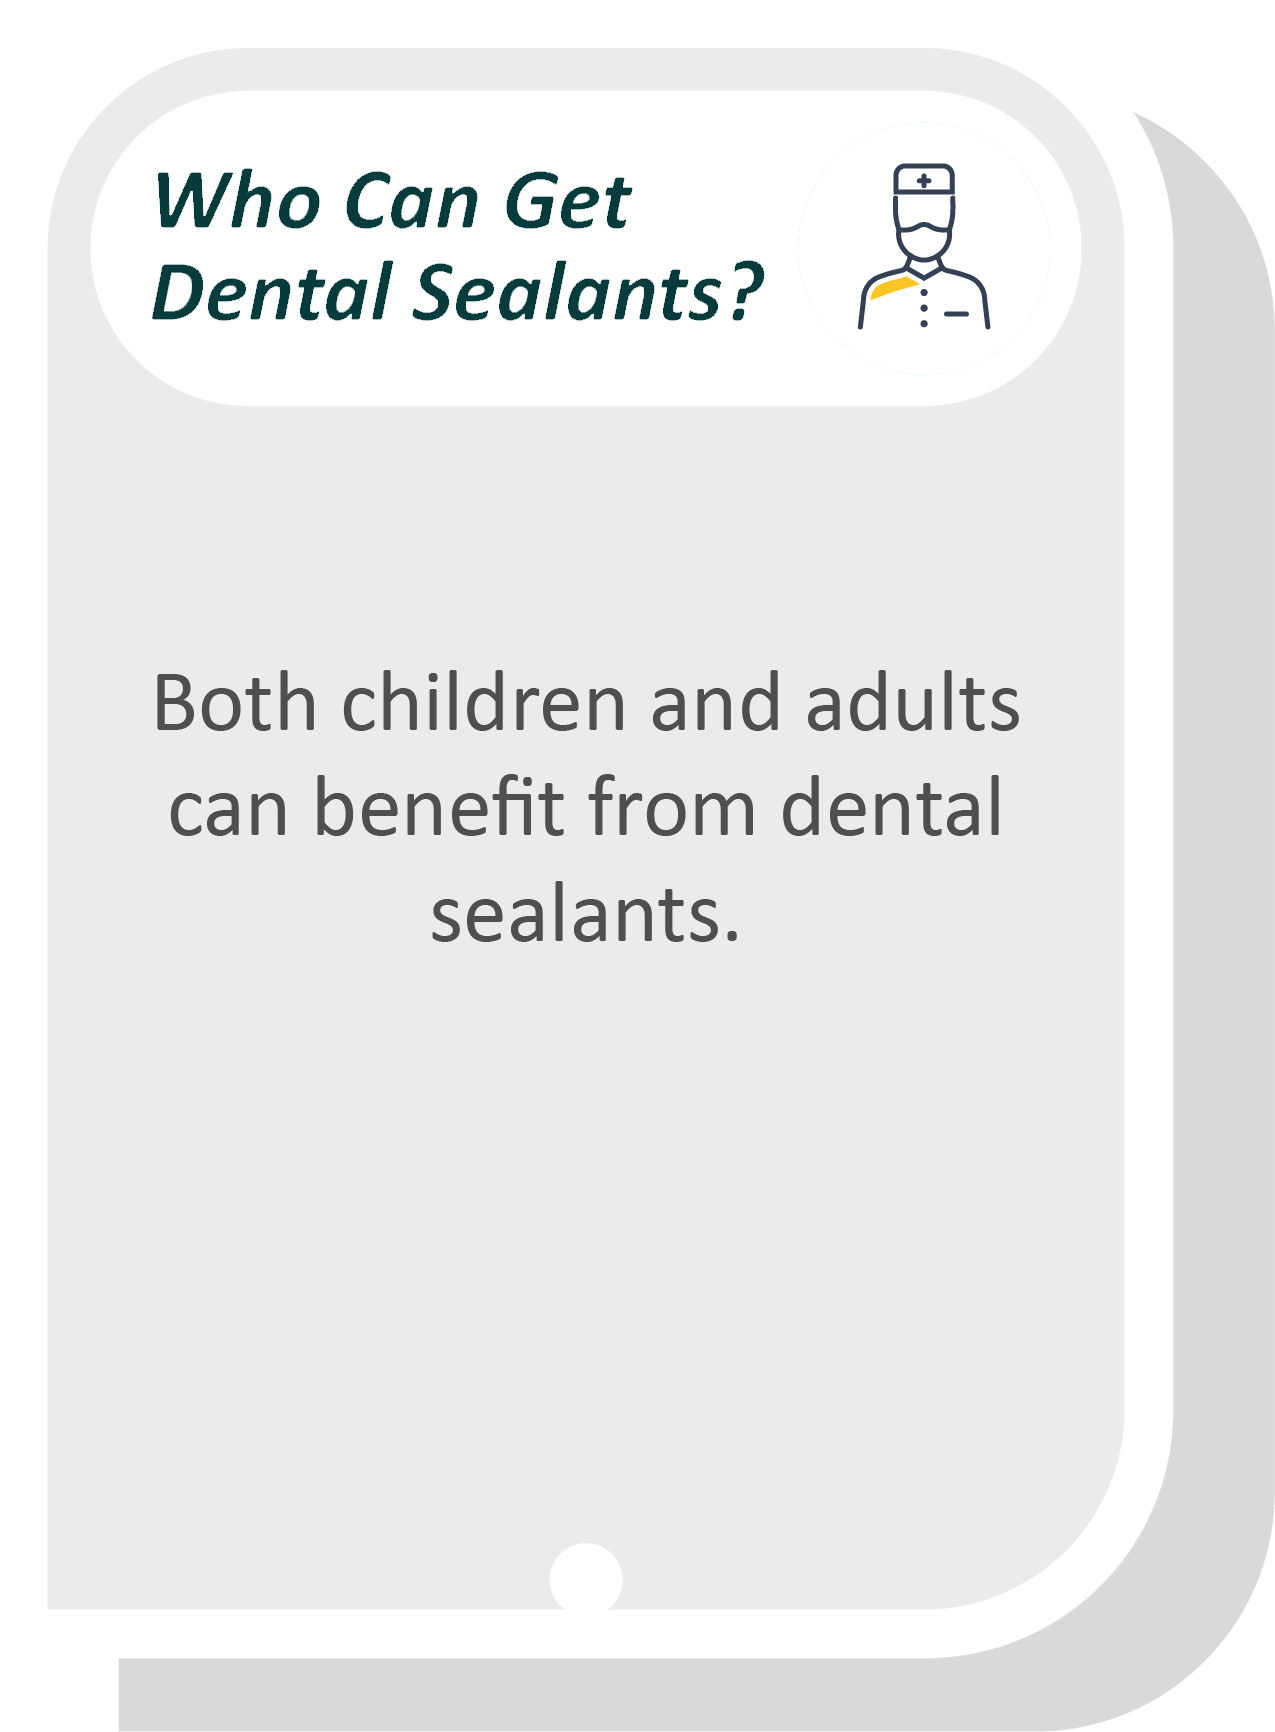 Dental restorations infographic: Both children and adults can benefit from dental sealants.